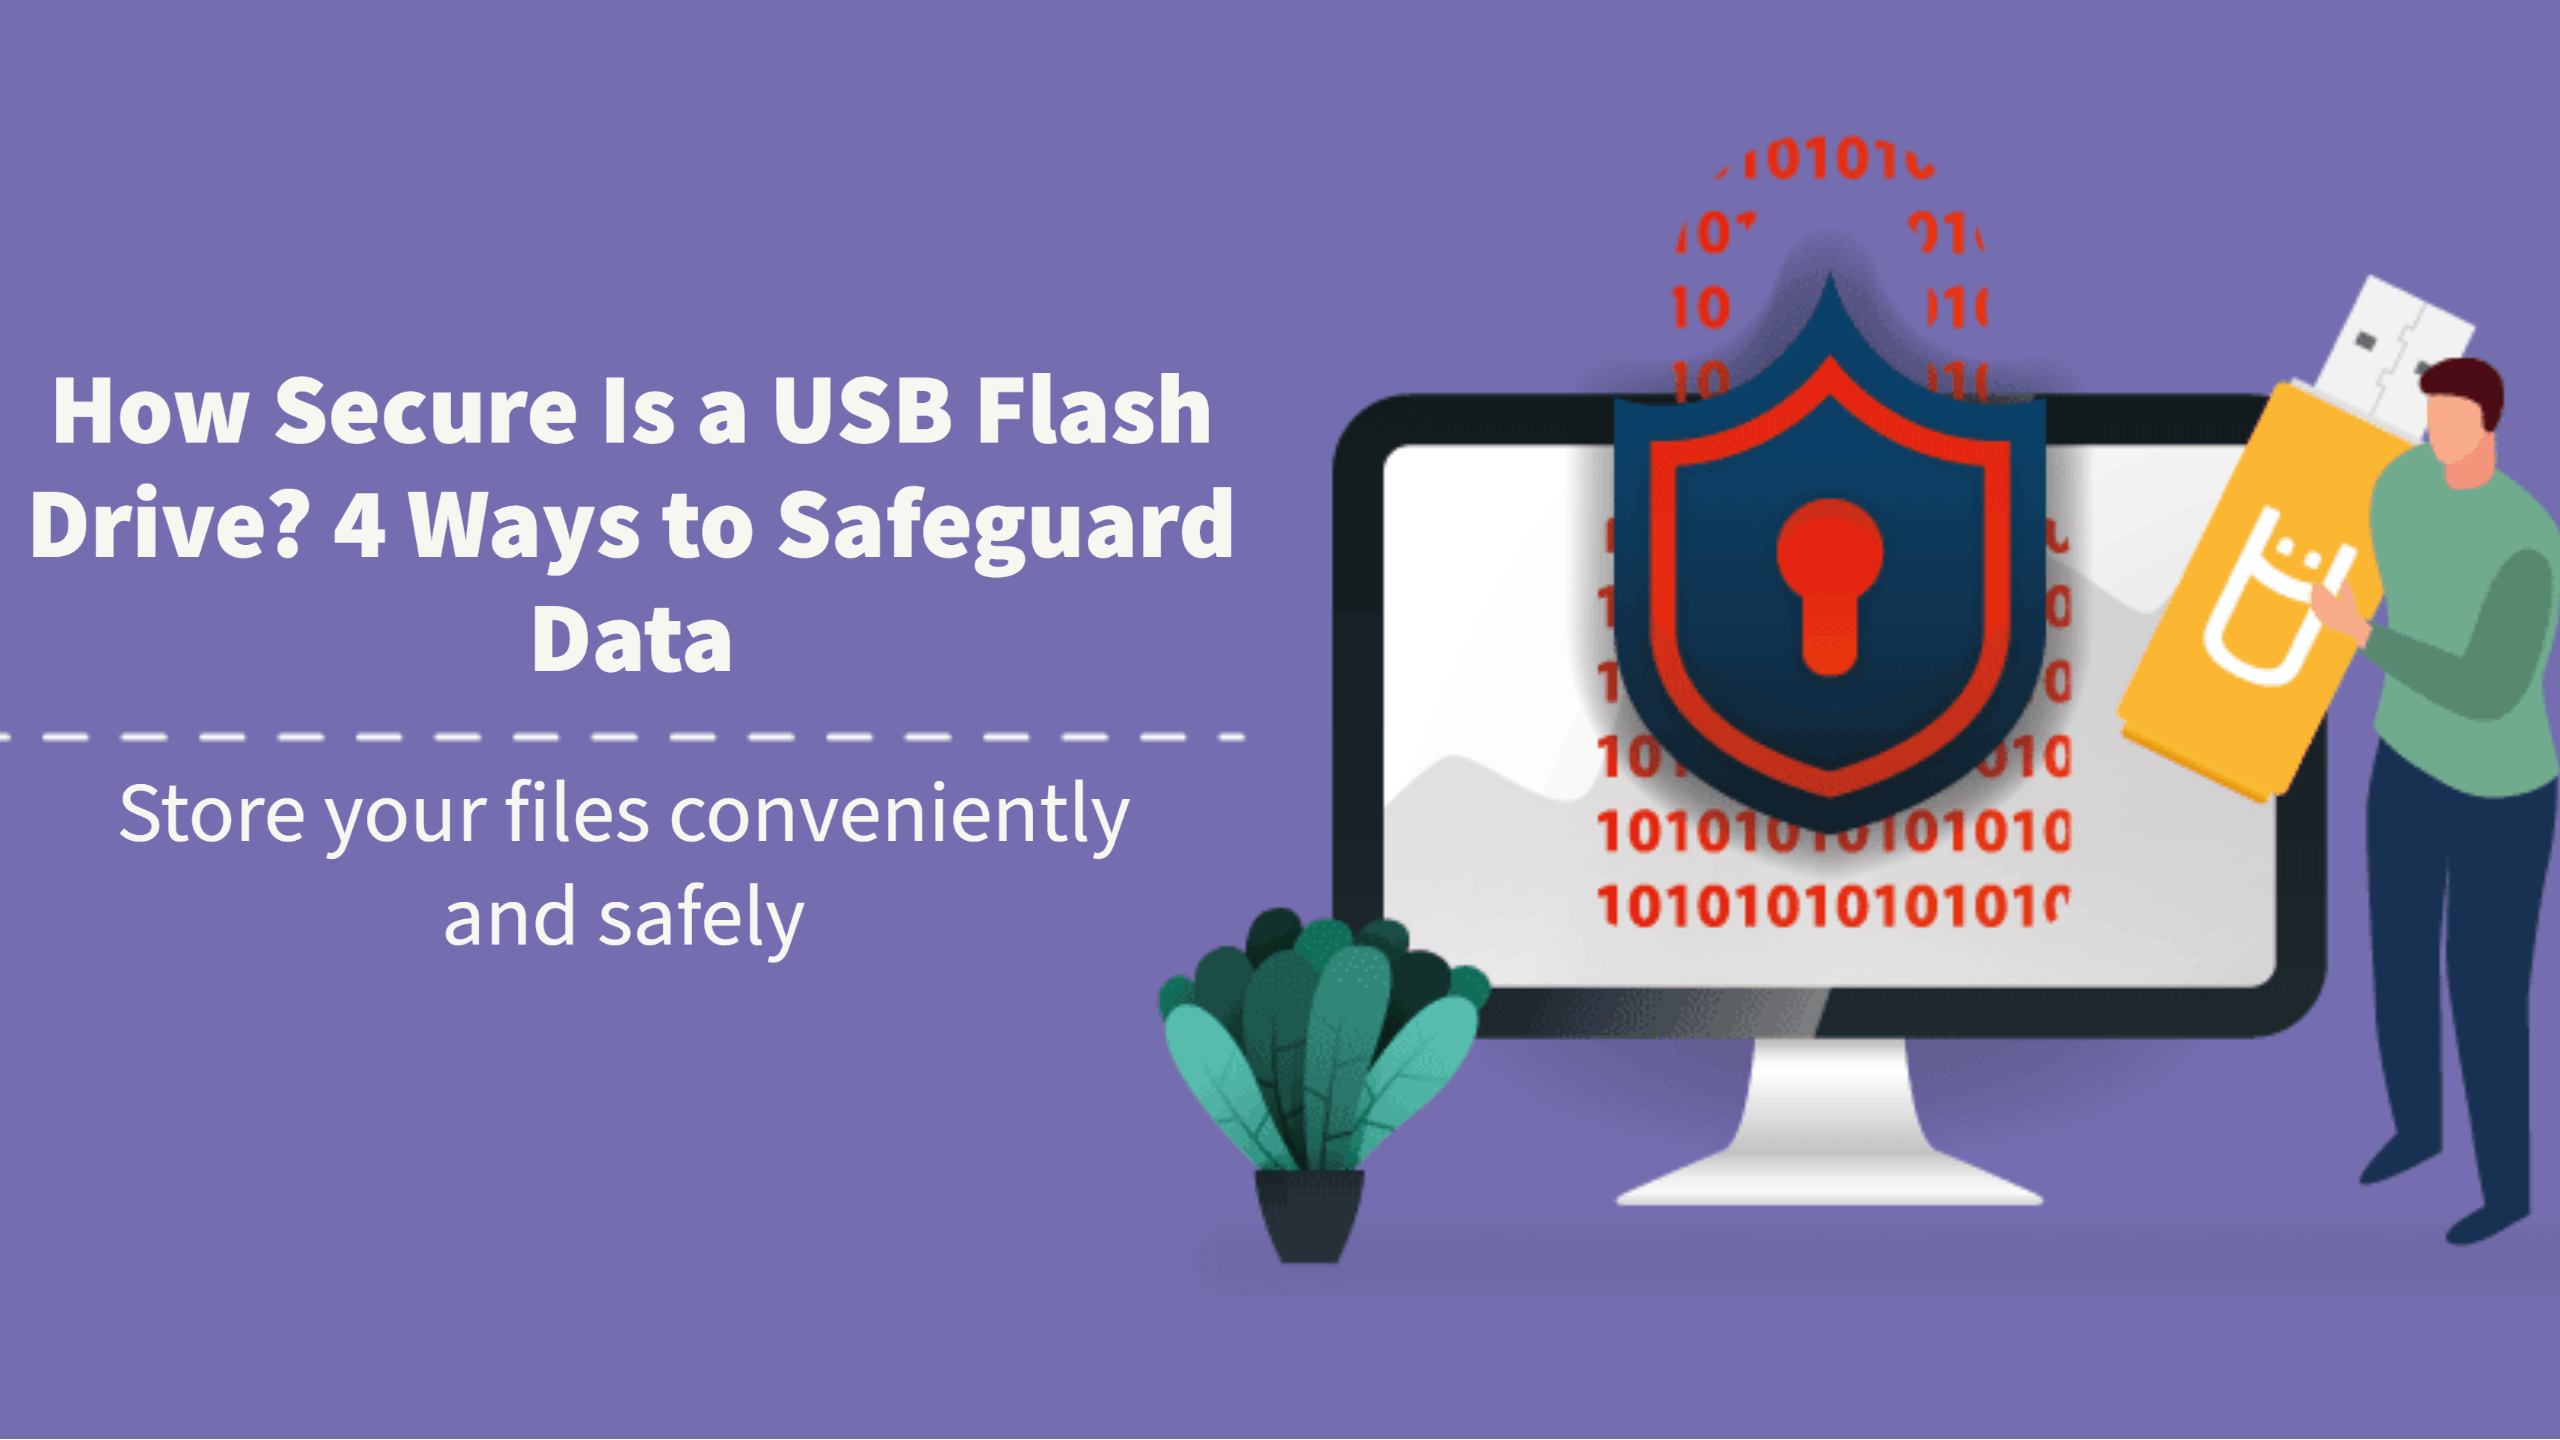 How secure is a USB flash drive